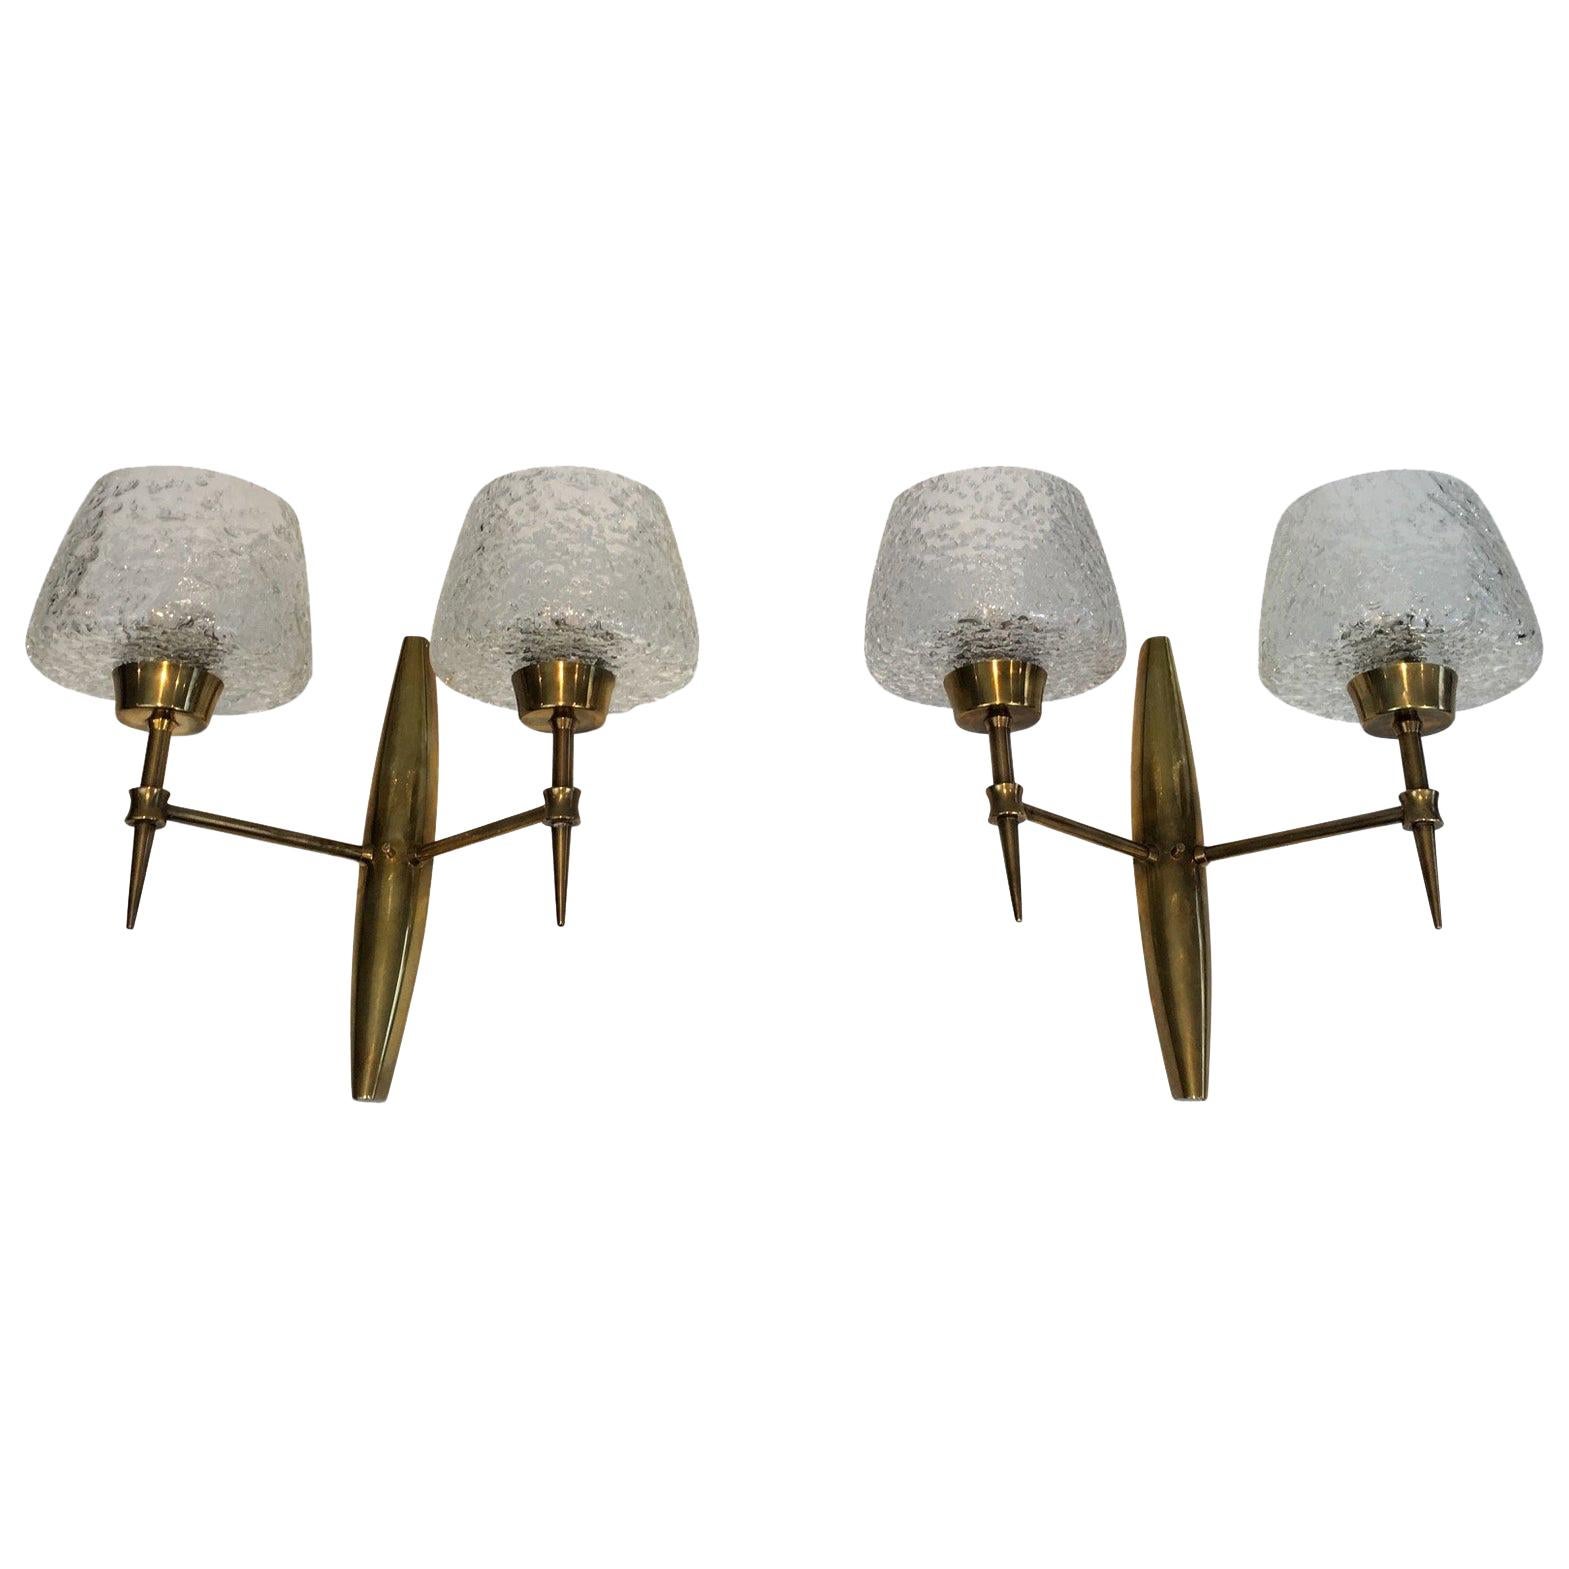 Pair of Bronze wall Sconces with Worked Glass Reflectors, Italian, circa 1960 For Sale